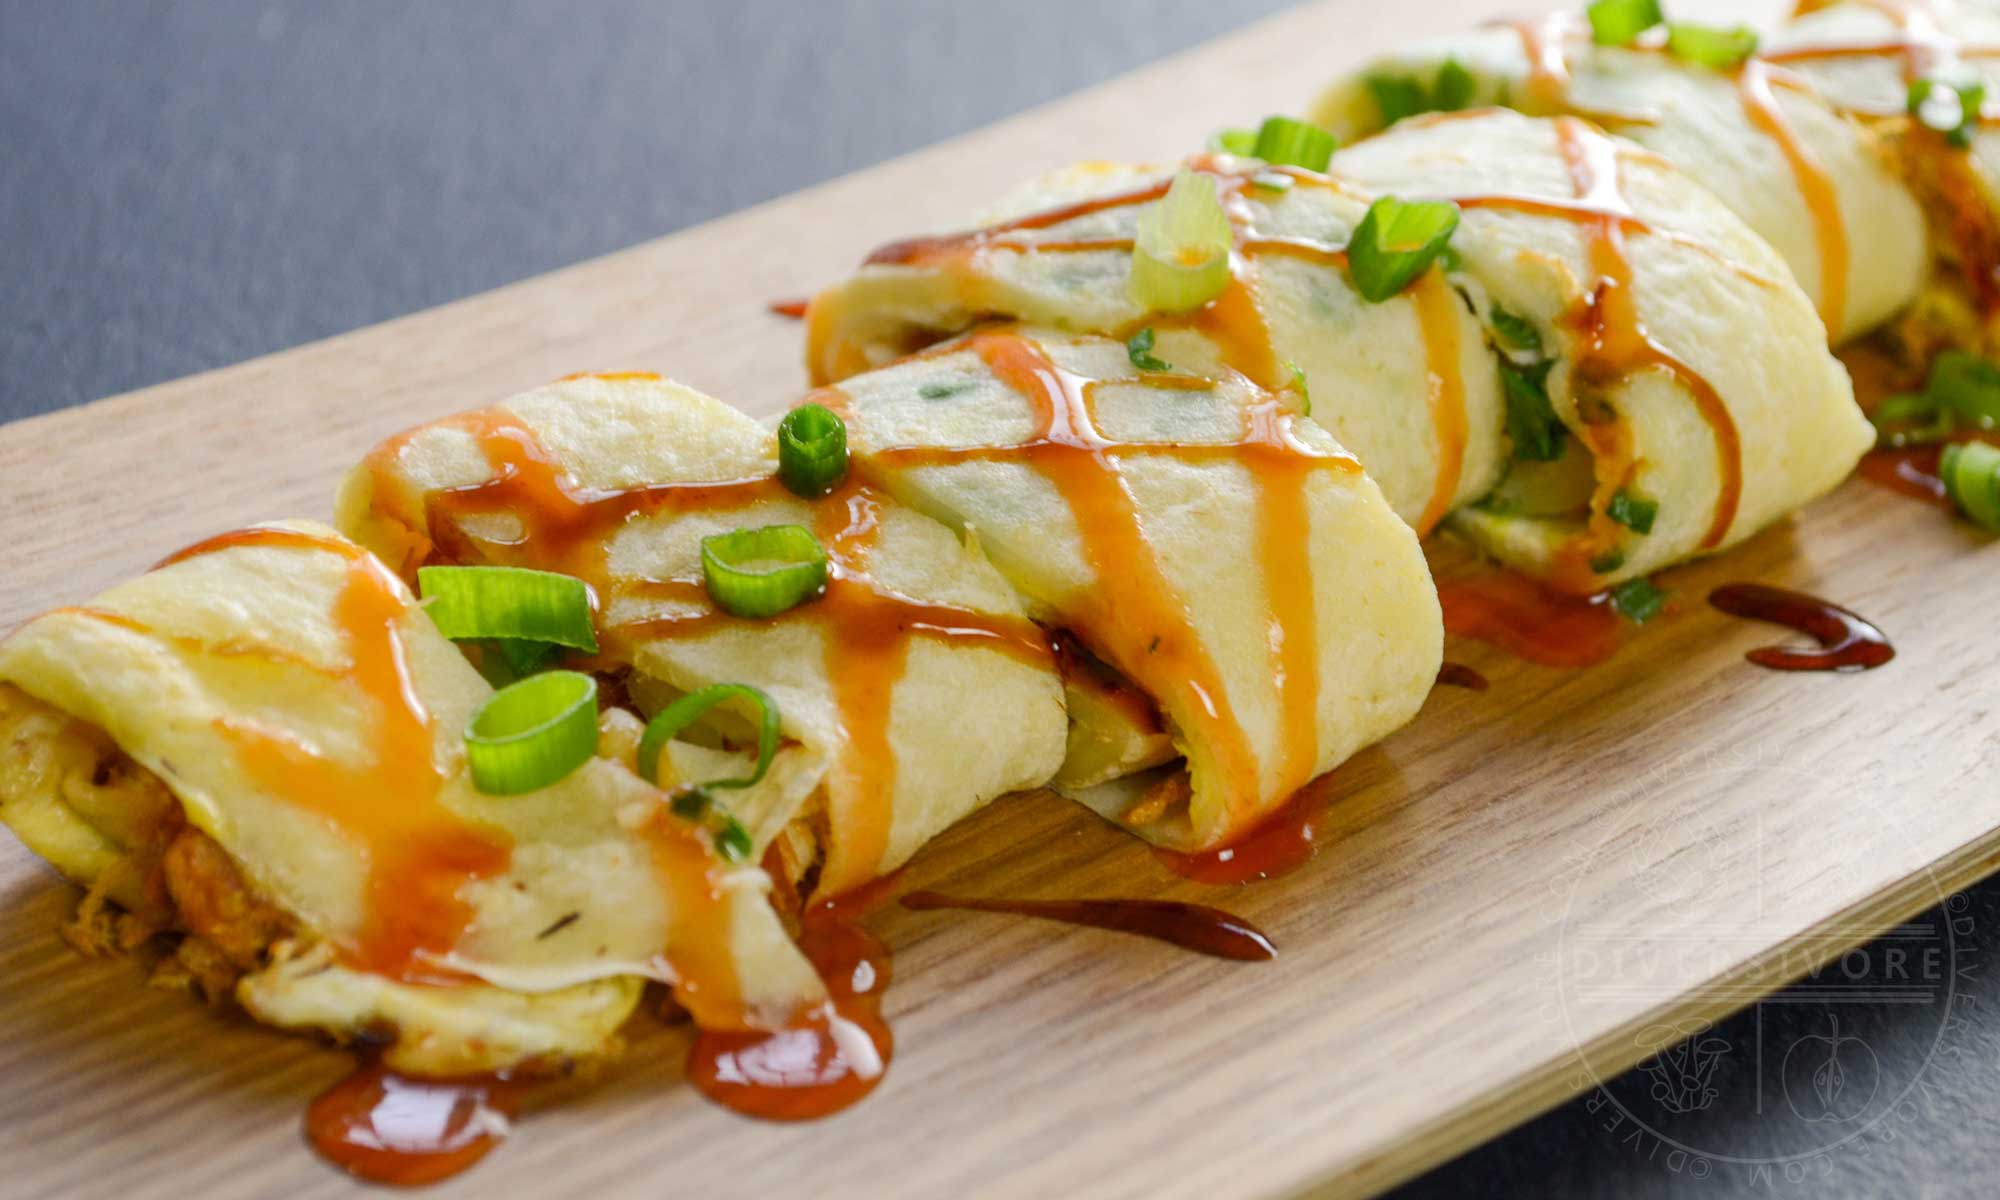 Featured image for “Dan Bing (Taiwanese Egg Crepes)”